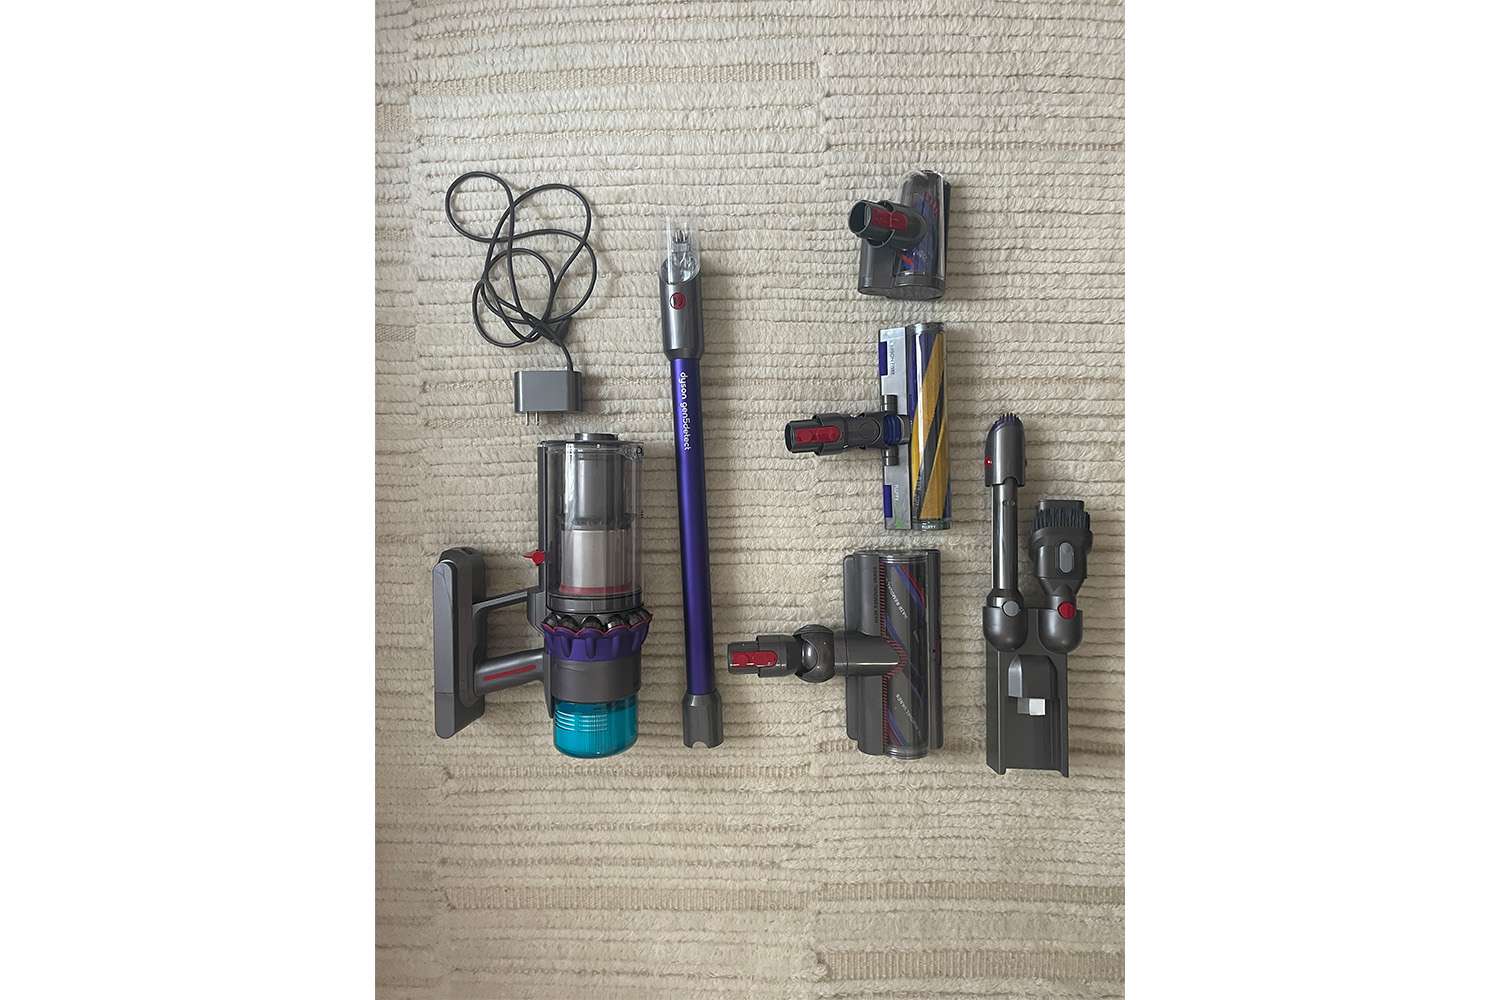 all parts of the Dyson Gen5Detect Cordless Vacuum laid out on floor